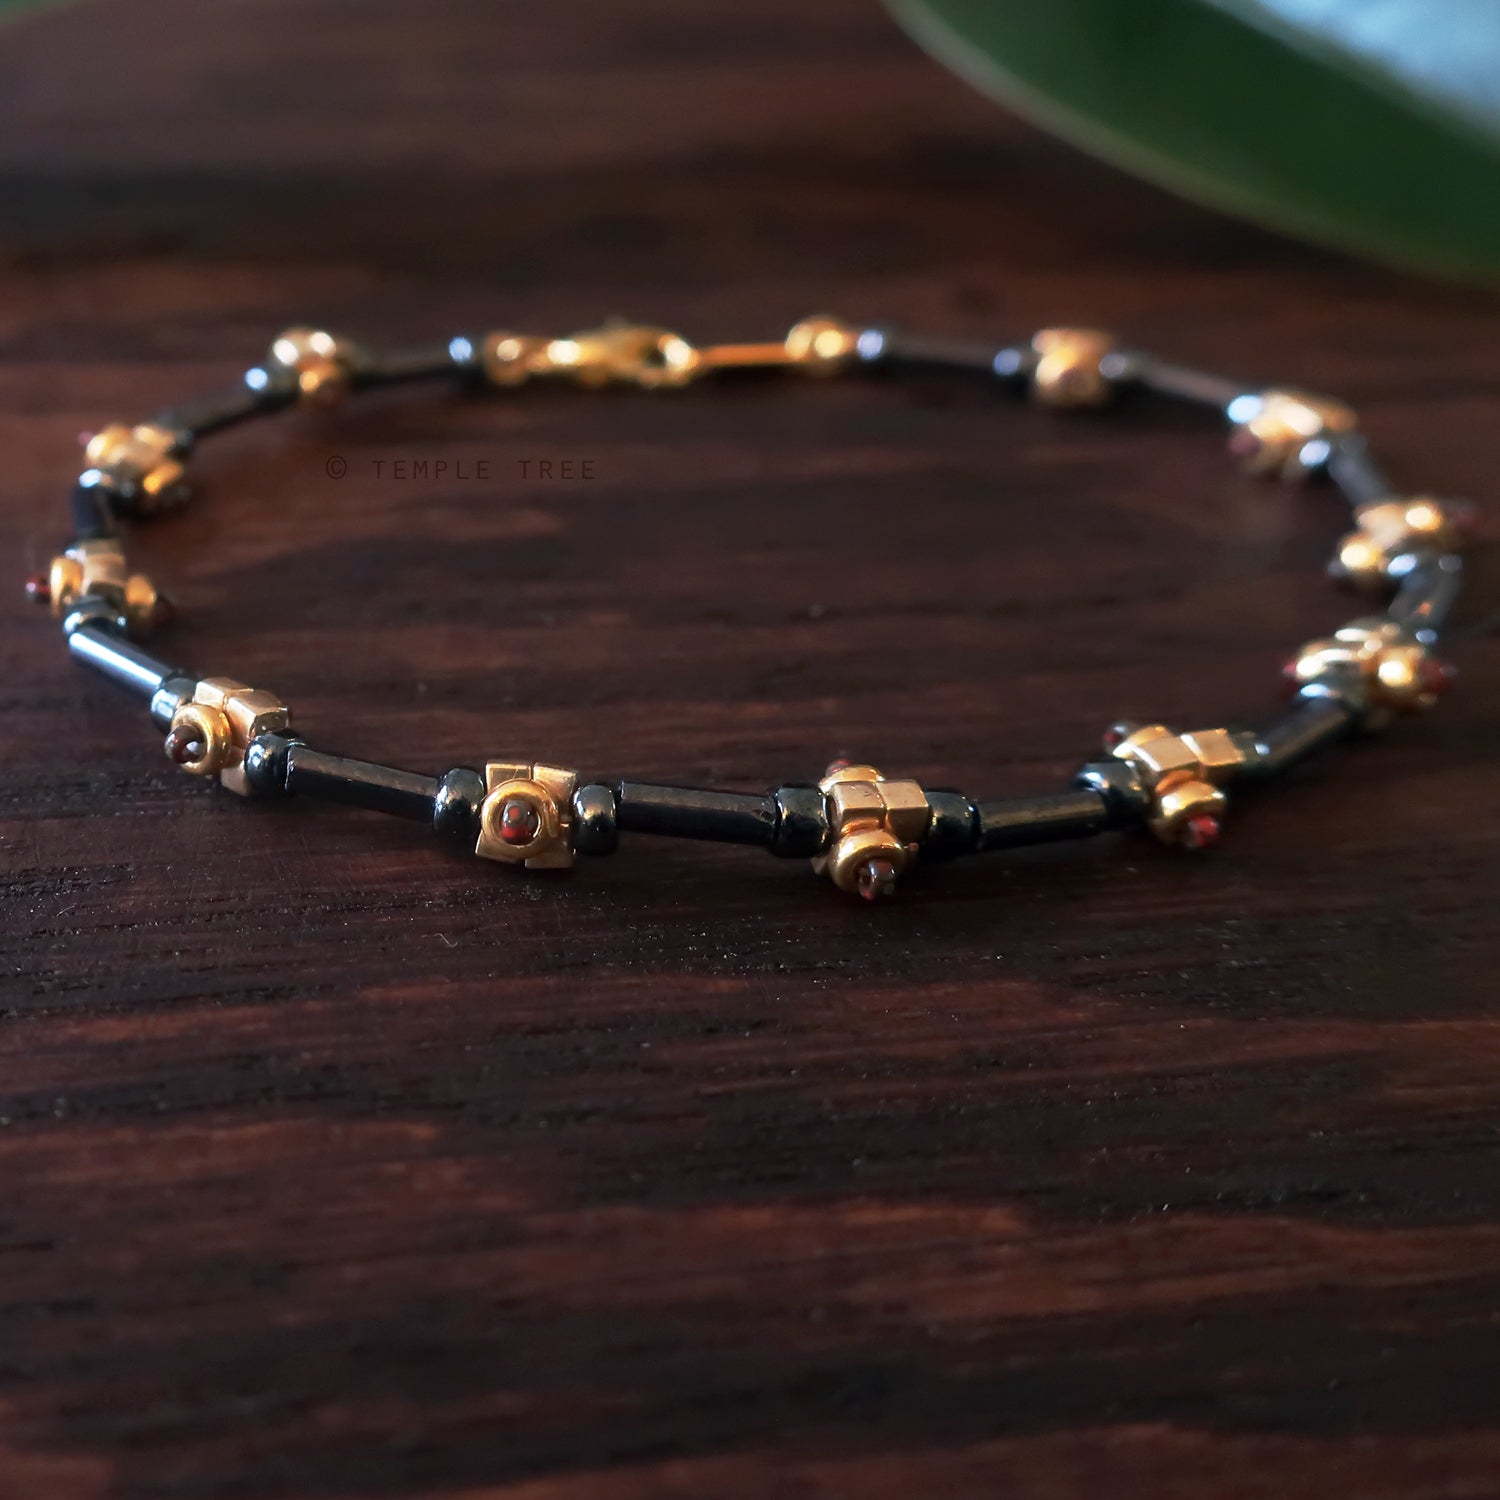 Temple Tree Lost Circuitry Beadwoven Bracelet v1 - Grey, Gold and Faux Bloodstone